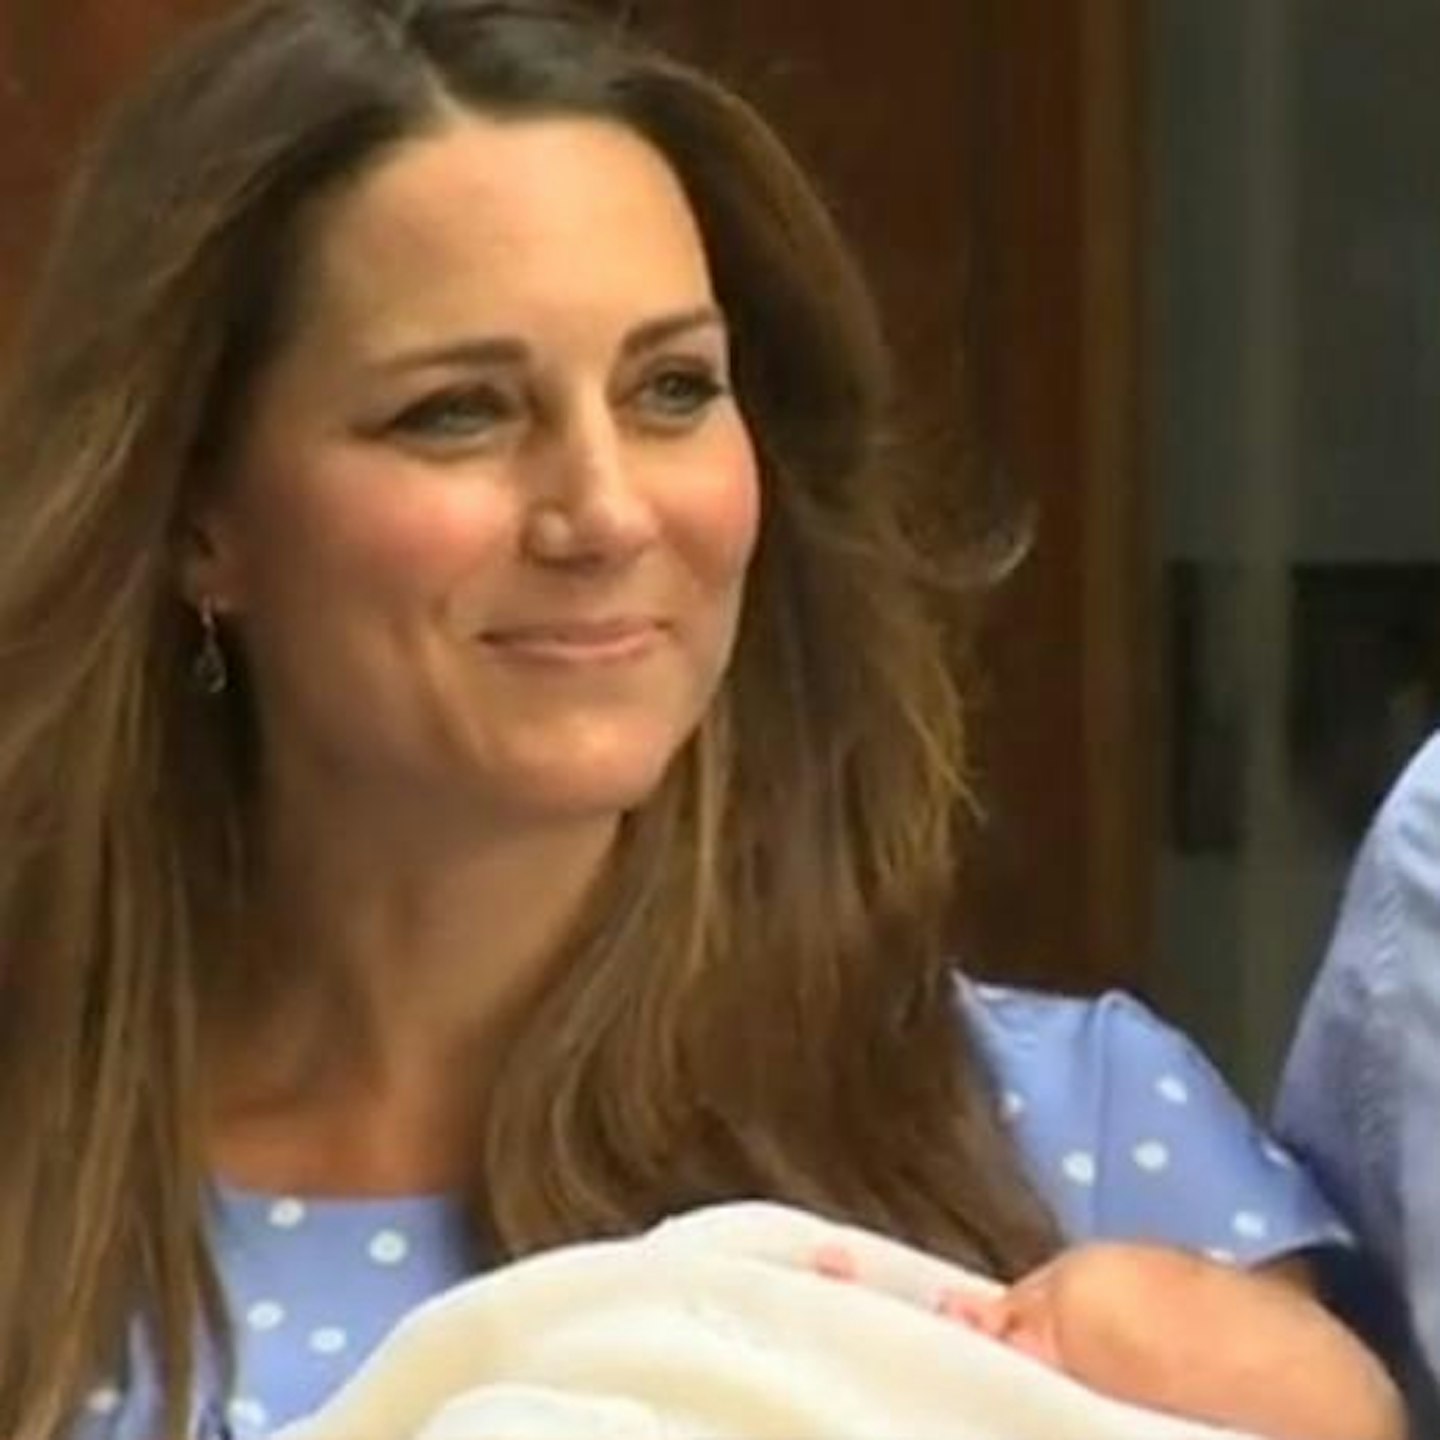 New mum Kate reportedly hopes to breastfeed baby son George